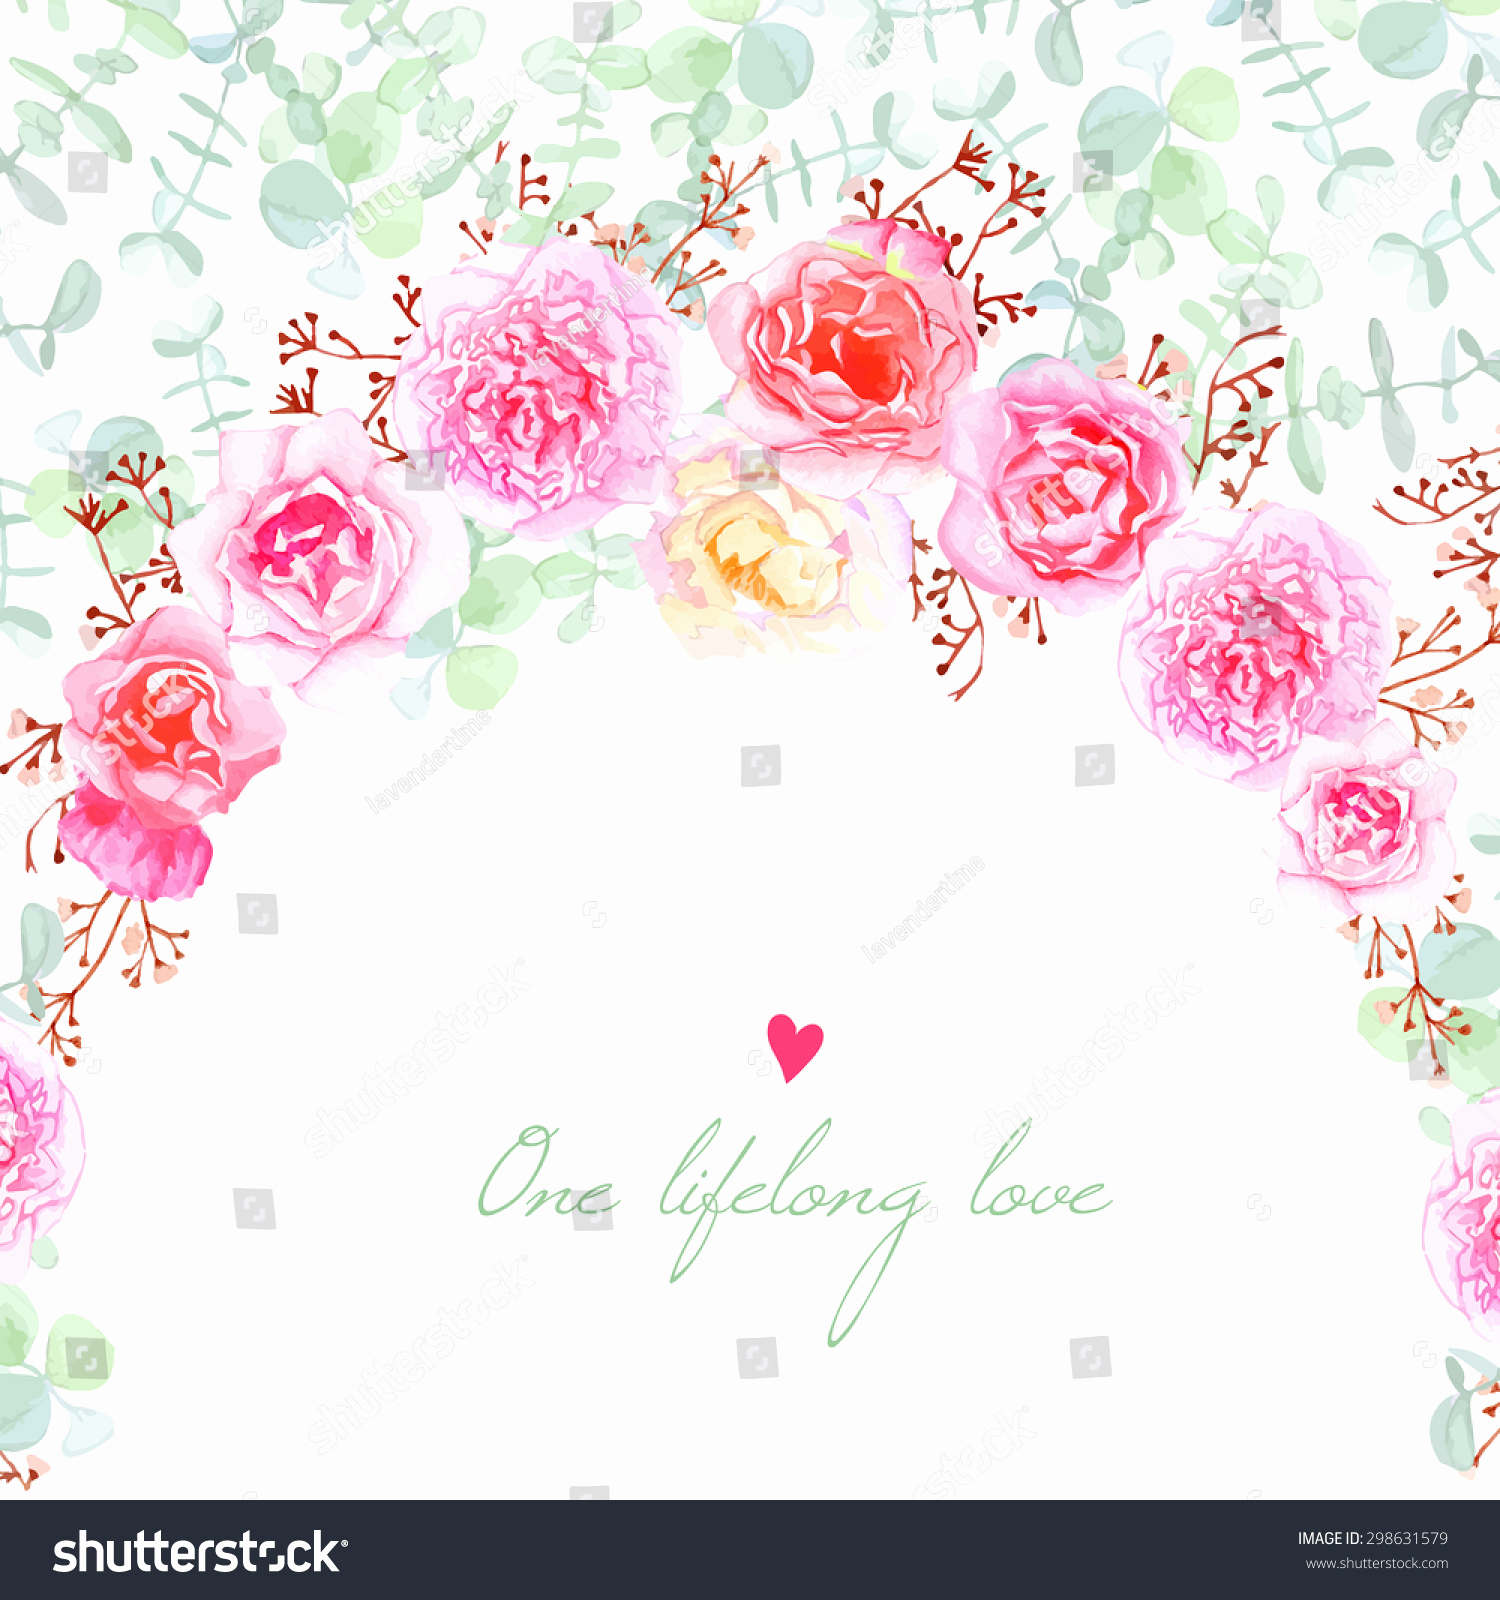 Shabby Chic Invitation Templates Free Lovely Wedding Flowers Vector Card Invitation Template Stock